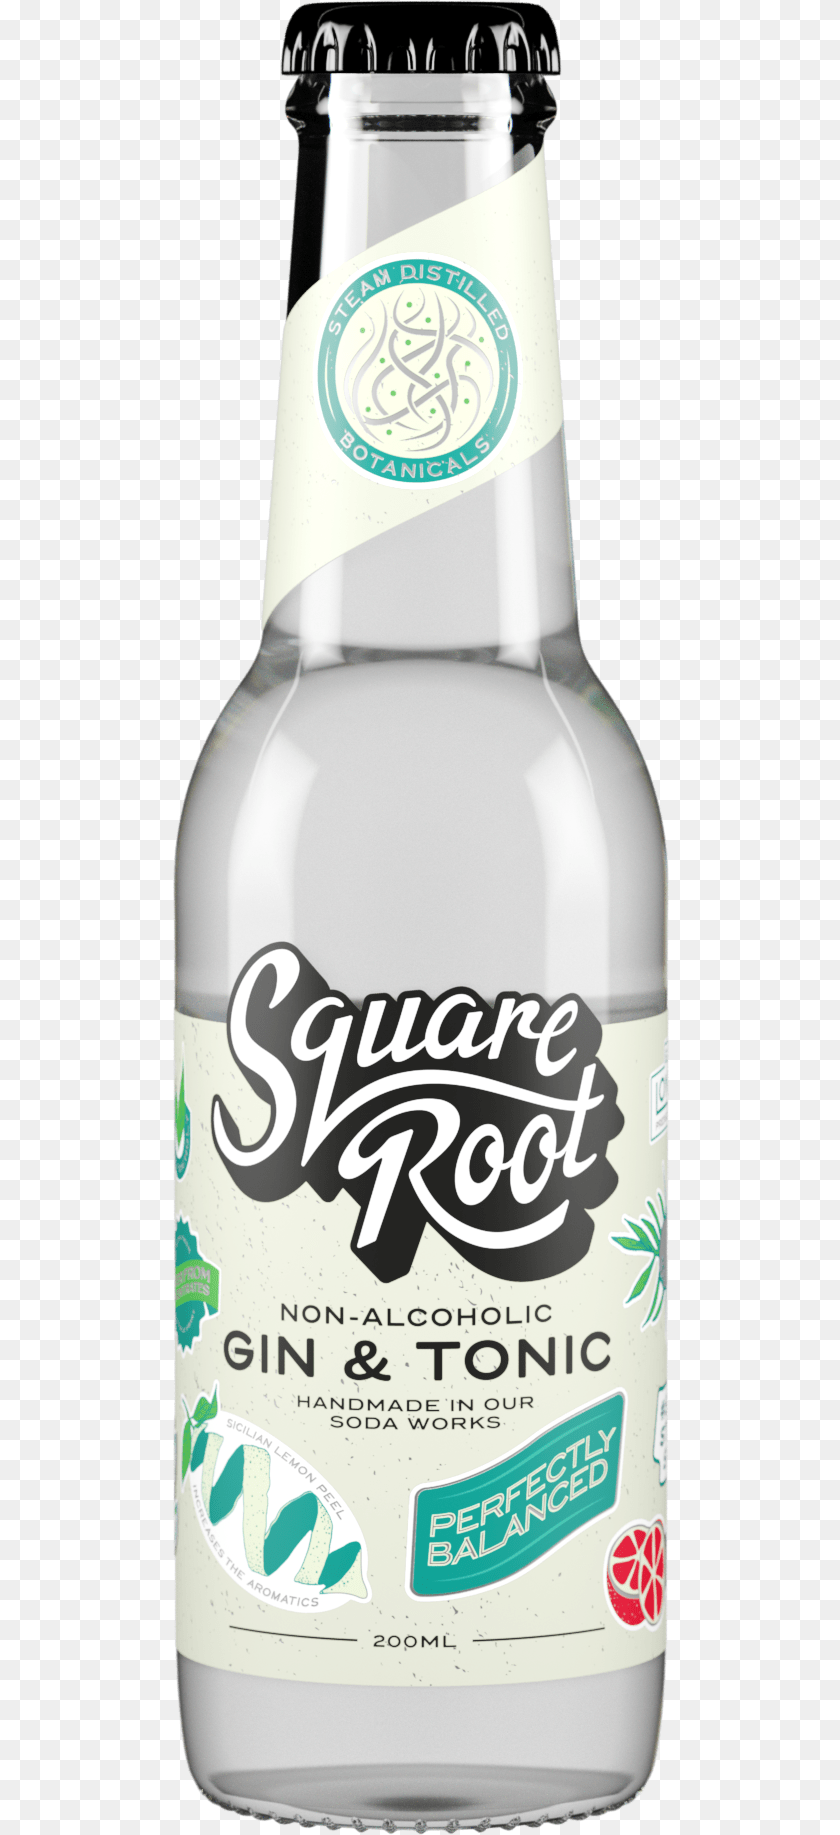 497x1835 Square Root Negroni, Beverage, Alcohol, Beer, Liquor PNG